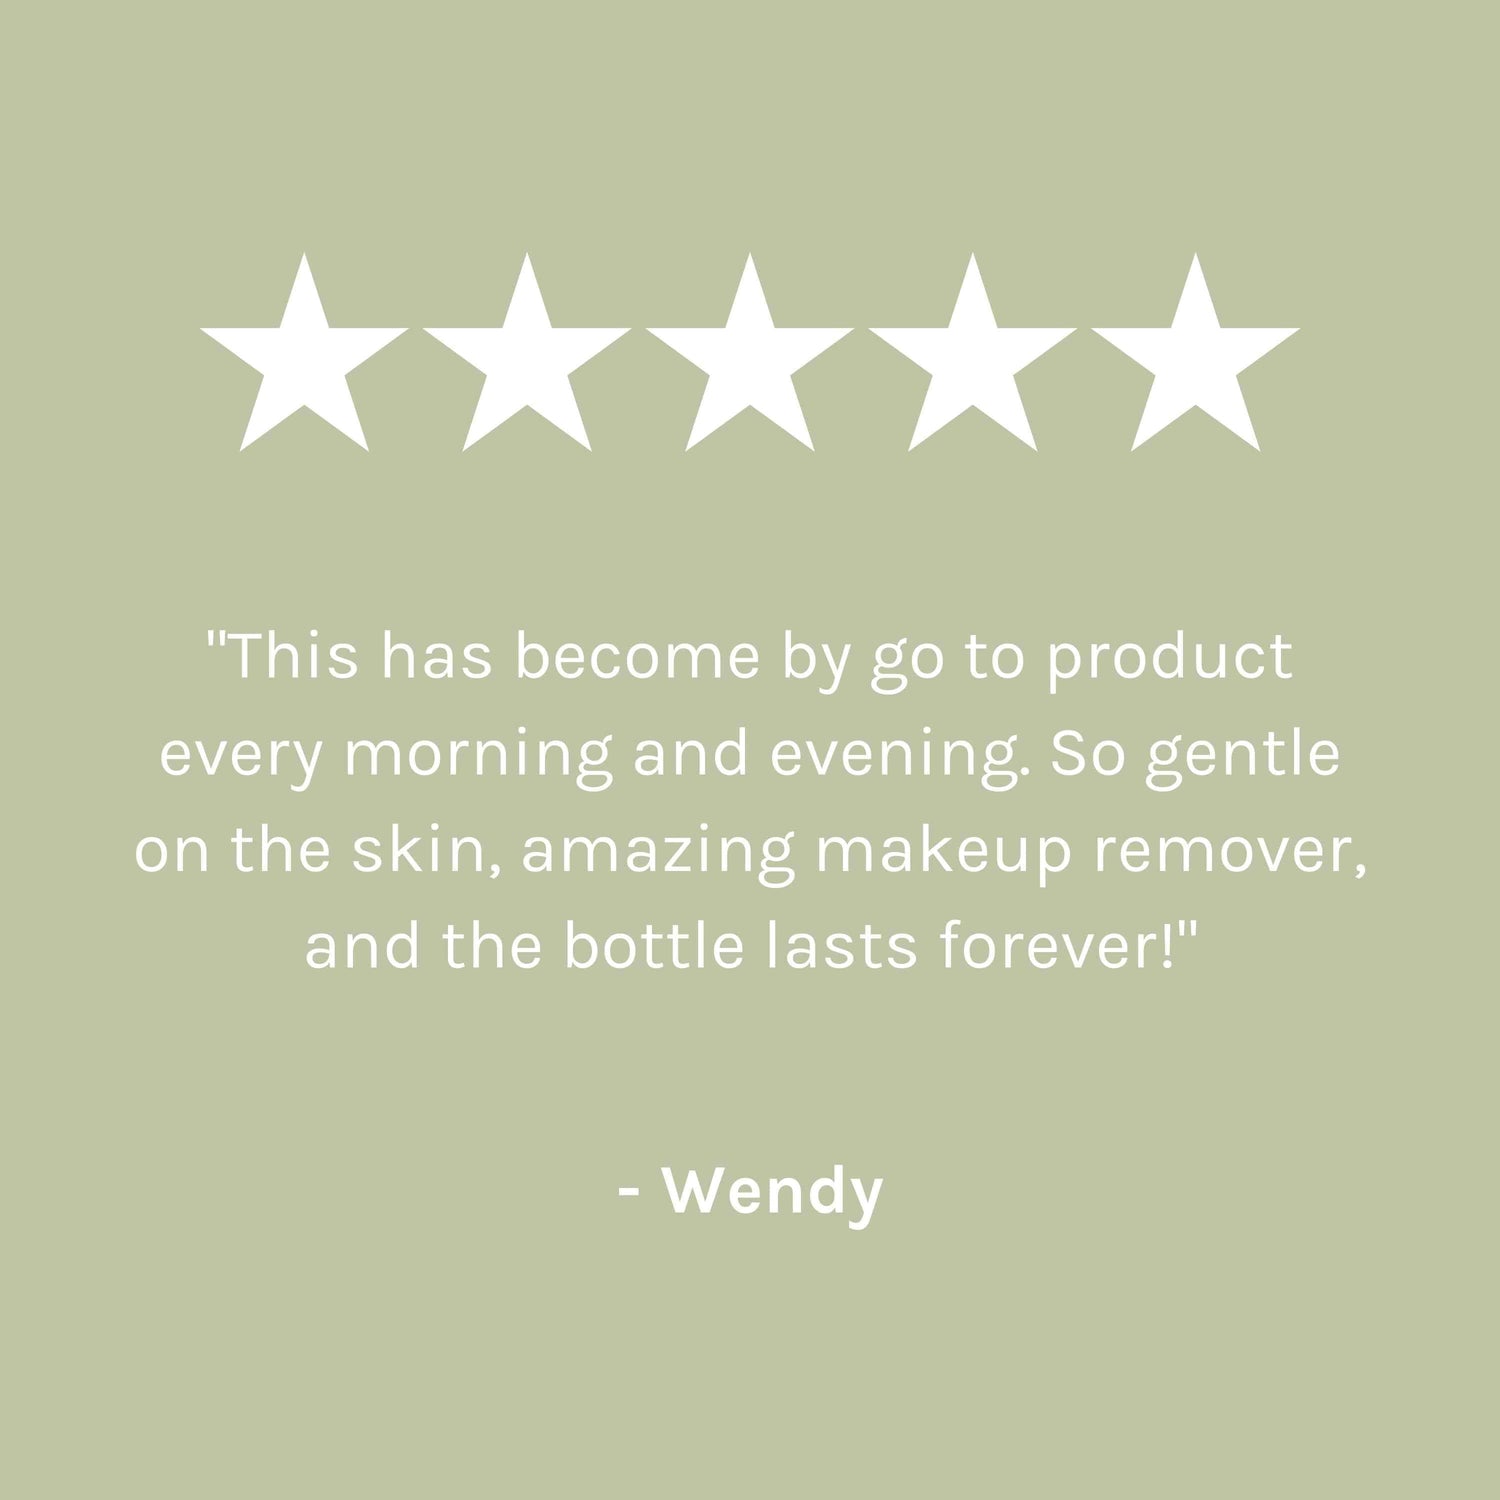 &quot;This has become my go to product every morning and evening. So gentle on the skin, amazing makeup remover, and the bottle lasts forever!&quot; - Wendy